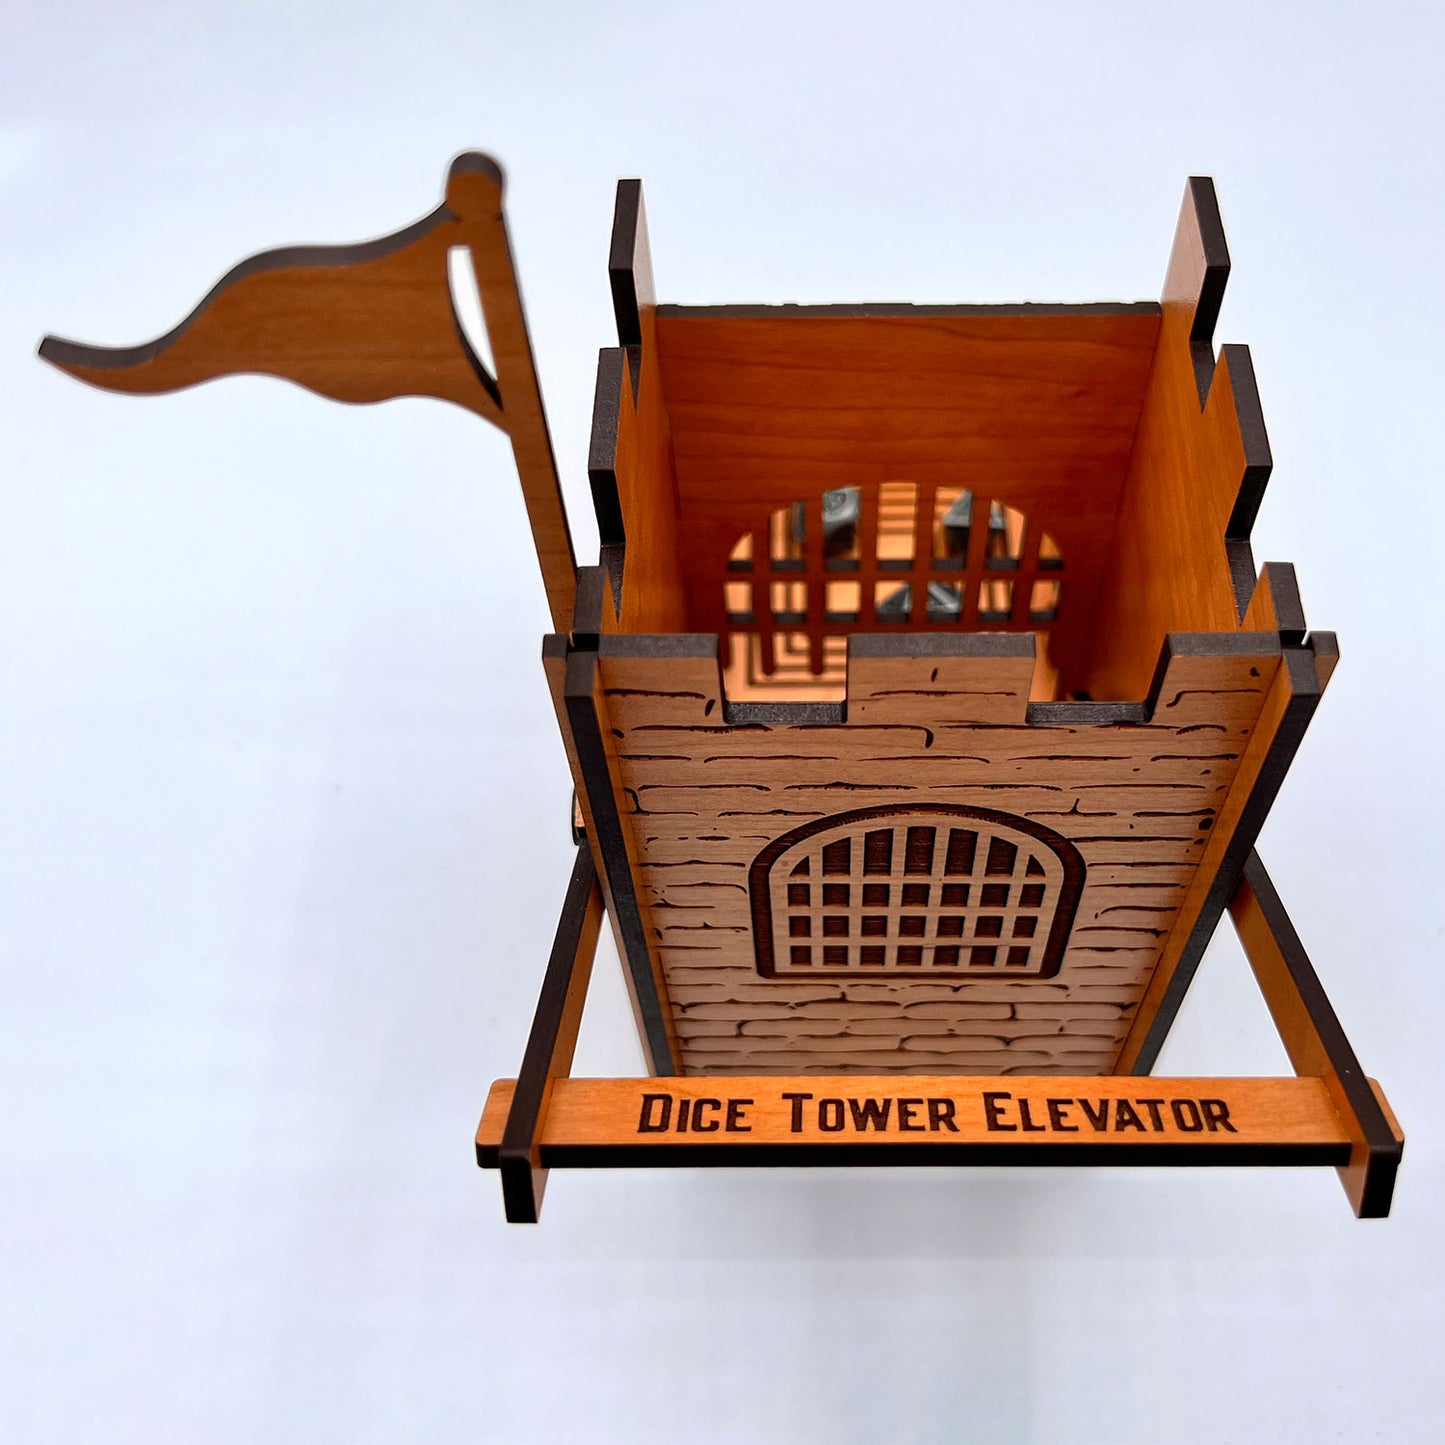 Castle Dice Tower with Elevator